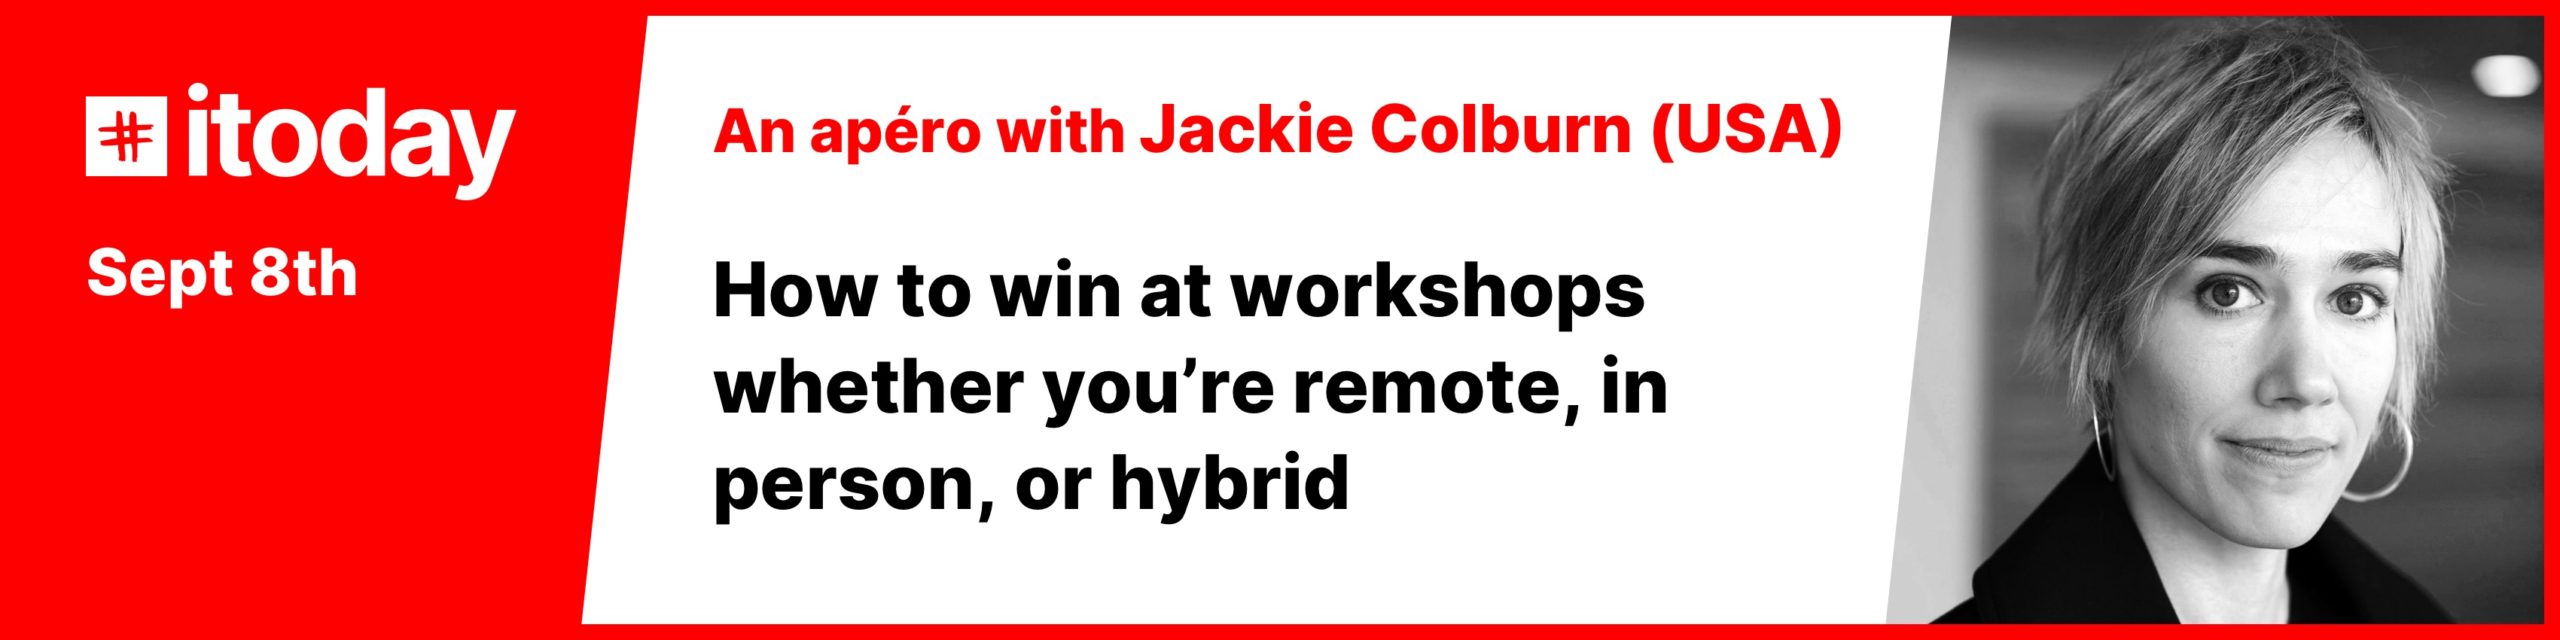 Itoday Apero - Jackie Colburn How to win at workshops whether you're remote, in person, or hybrid